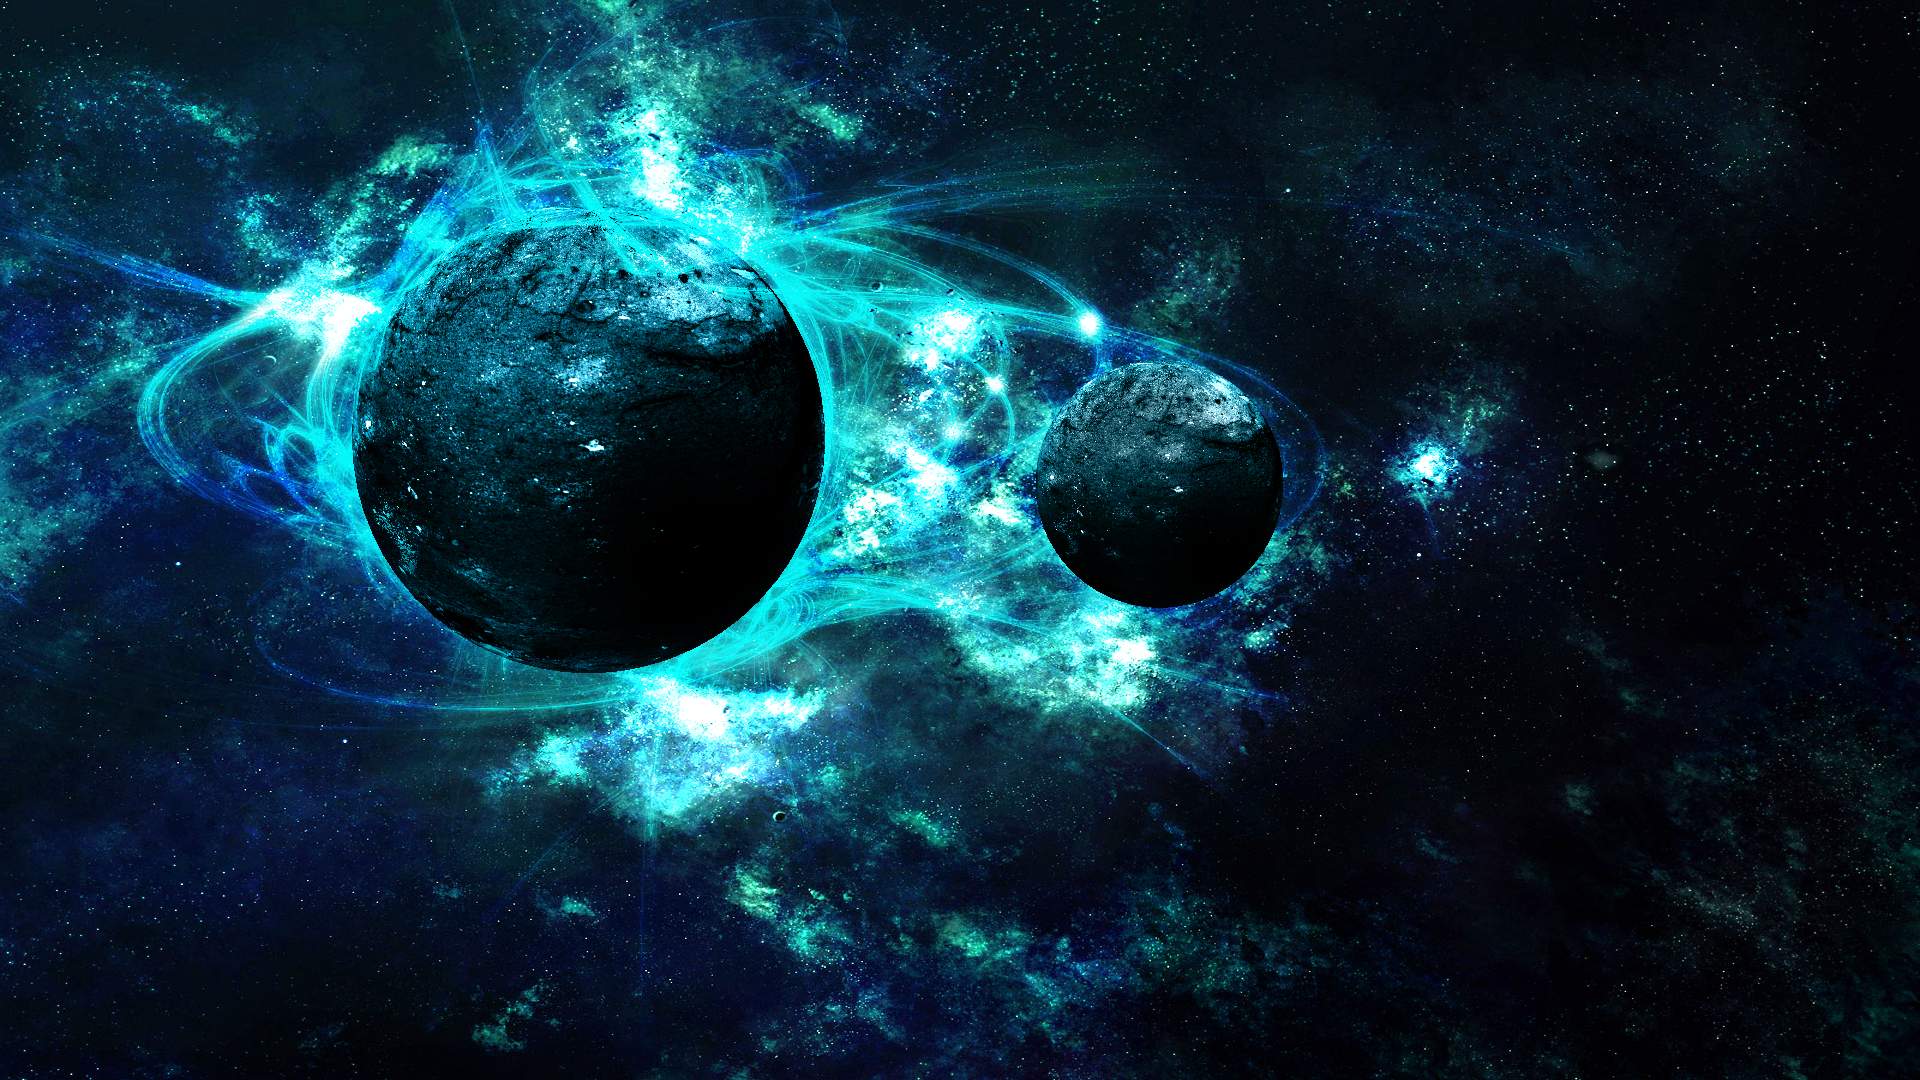 Desktop Wallpaper Blue Galaxy Planets, Hd Image, Picture, Background, 8r6zbc